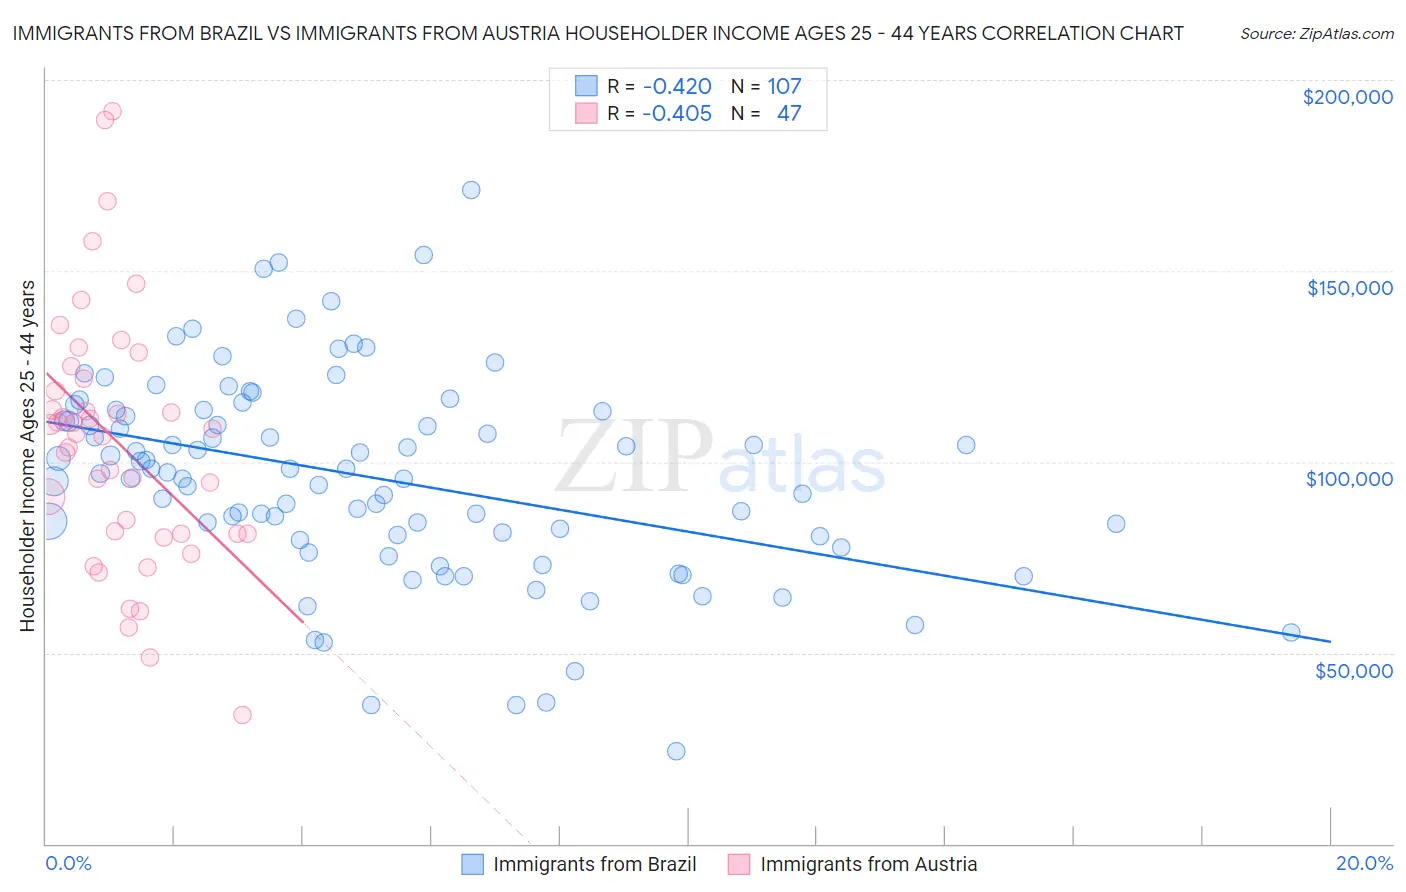 Immigrants from Brazil vs Immigrants from Austria Householder Income Ages 25 - 44 years